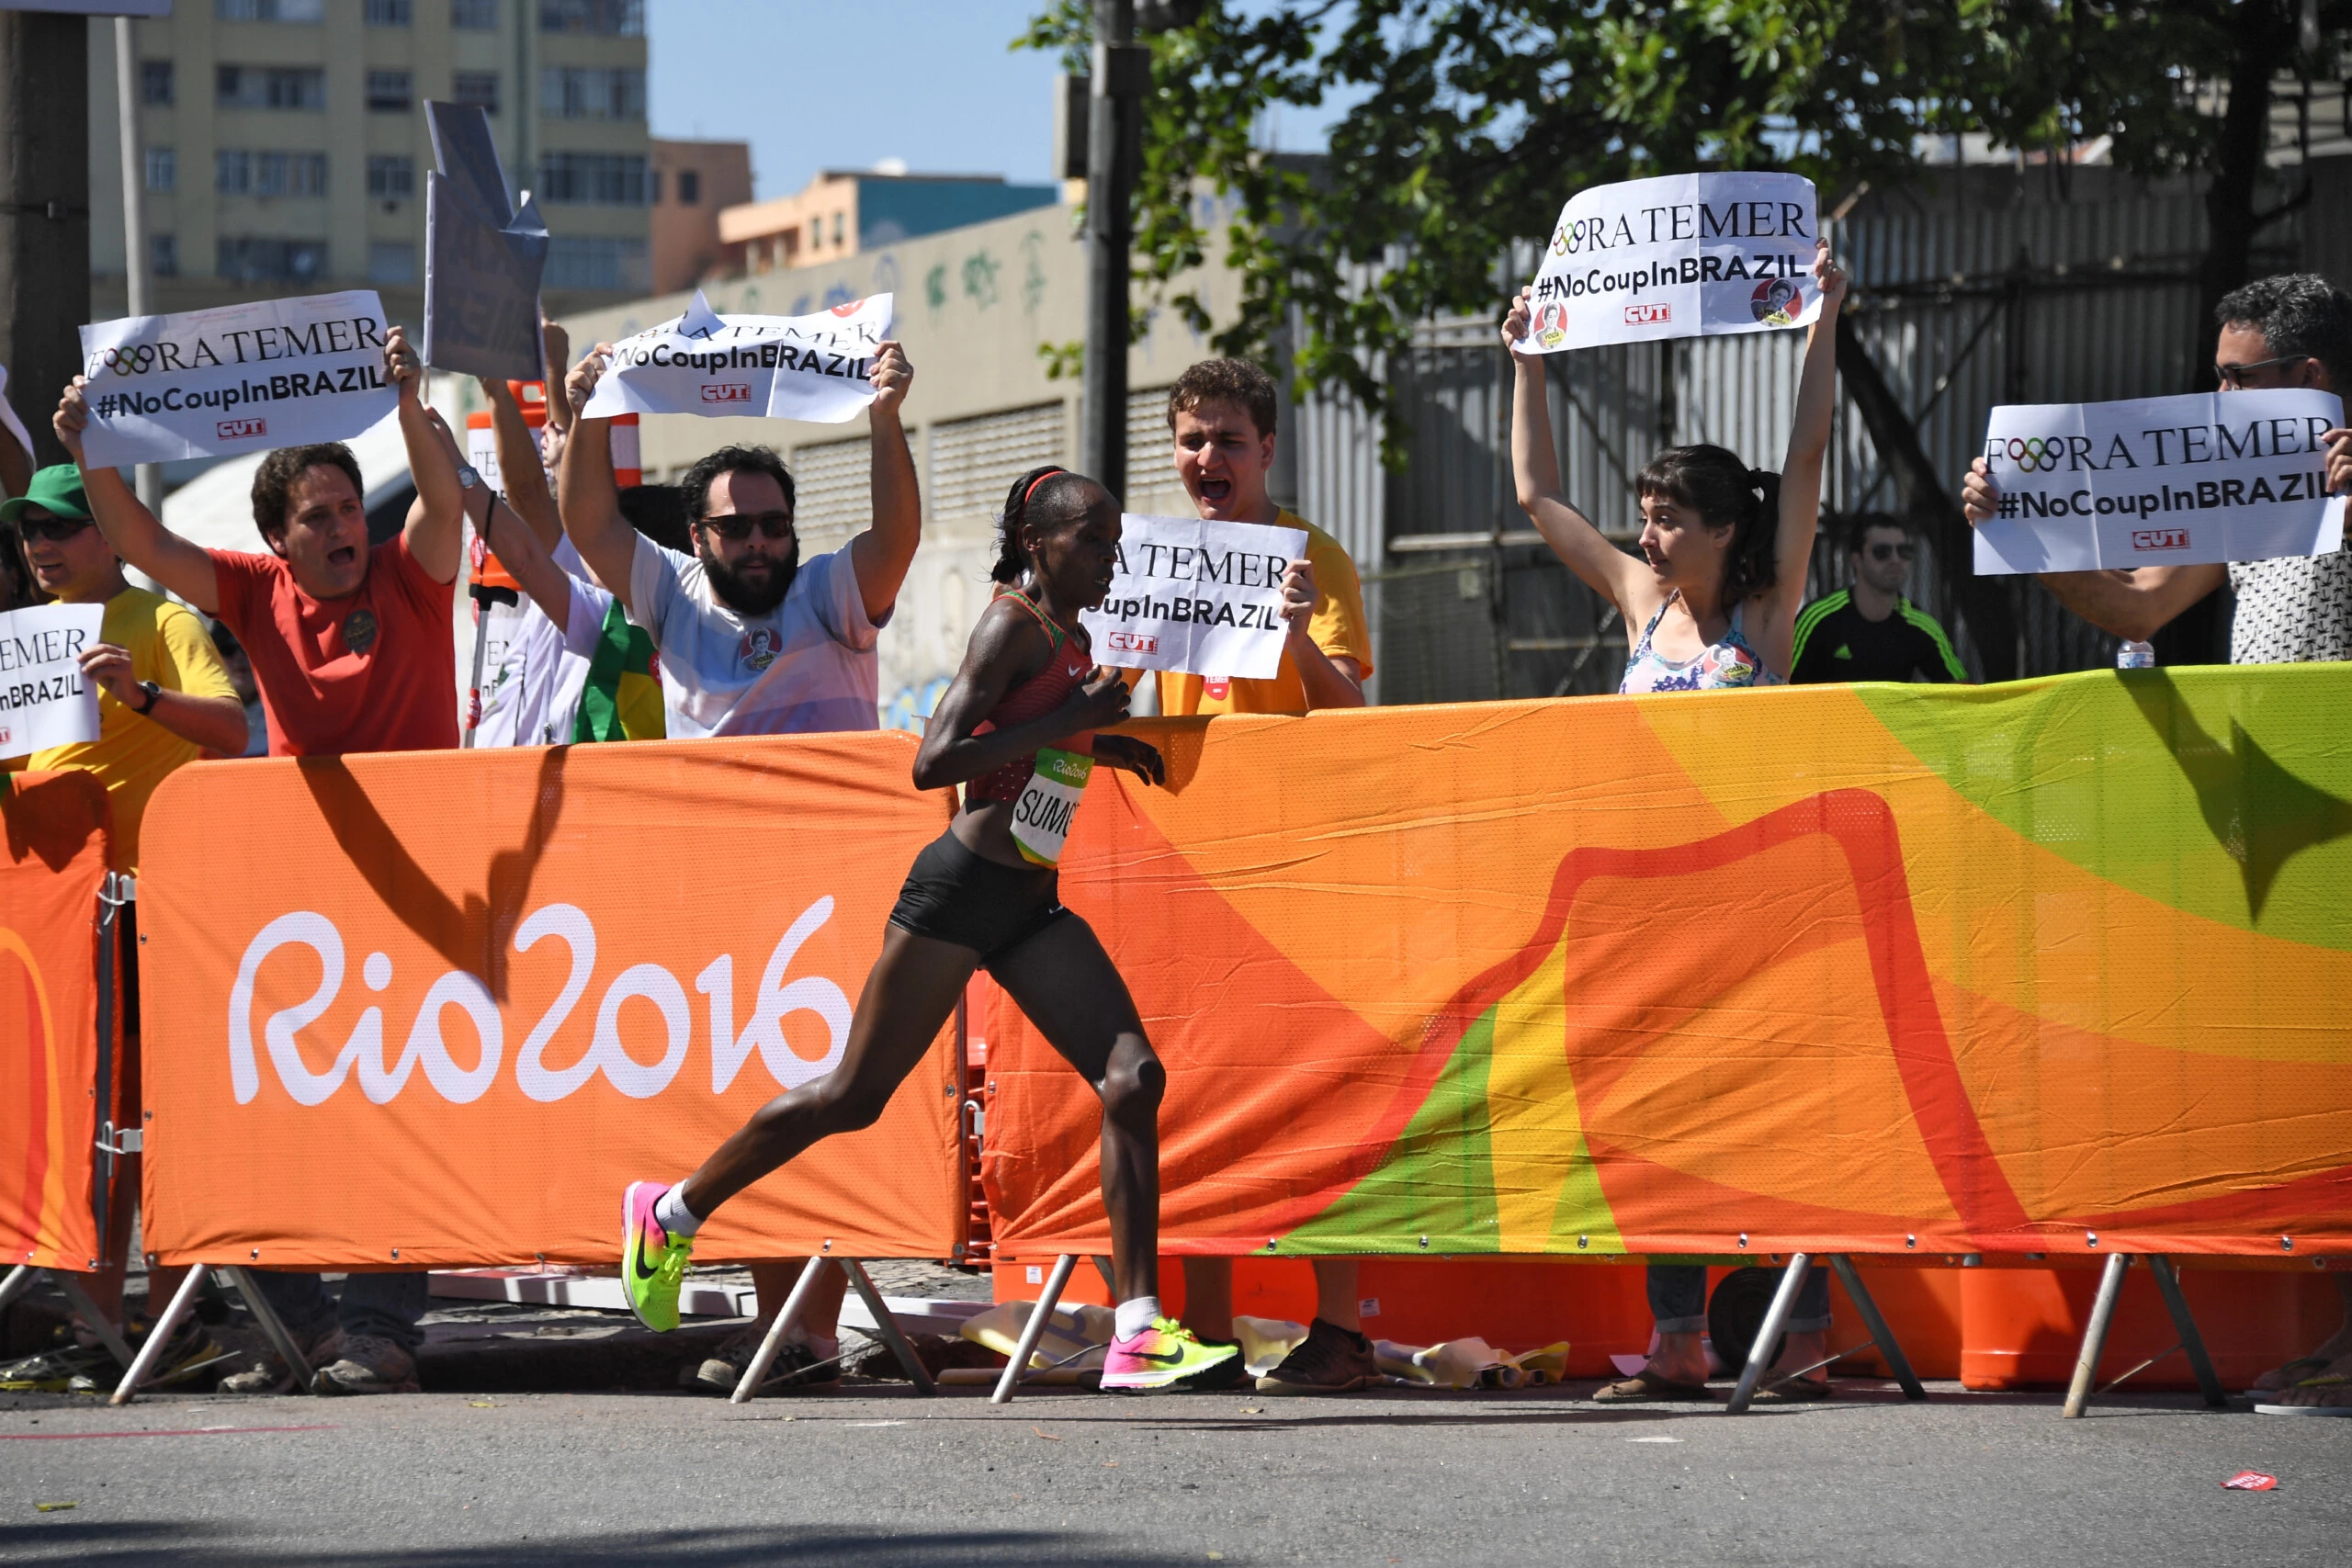 RIO DE JANEIRO, BRAZIL - AUGUST 14:  Kenya's Jemima Jelagat Sumgong runs past protester holding banner against Brazil's interim leader reading "Fora Temer" (Temer out) in the finish area of the Women's Marathon during the athletics event at the Rio 2016 Olympic Games at Sambodromo in Rio de Janeiro on August 14, 2016.    (Photo by Johannes EISELE-Pool/Getty Images)